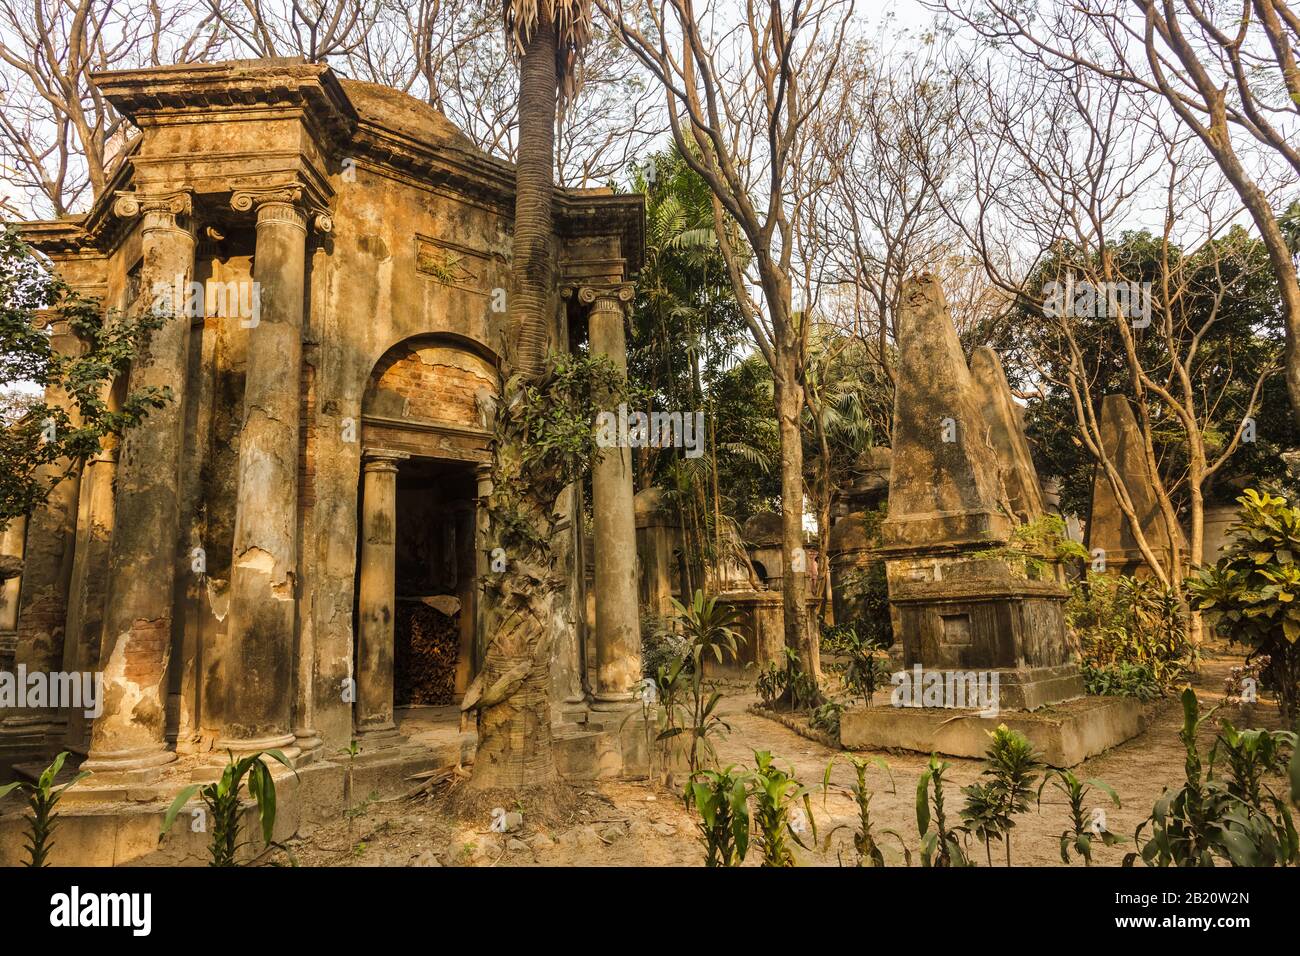 Kolkata, West Bengal/India - January 26 2018: The gothic, Indo-Saracenic tombs surrounded by trees inside the South Park Street Cemetary. Stock Photo